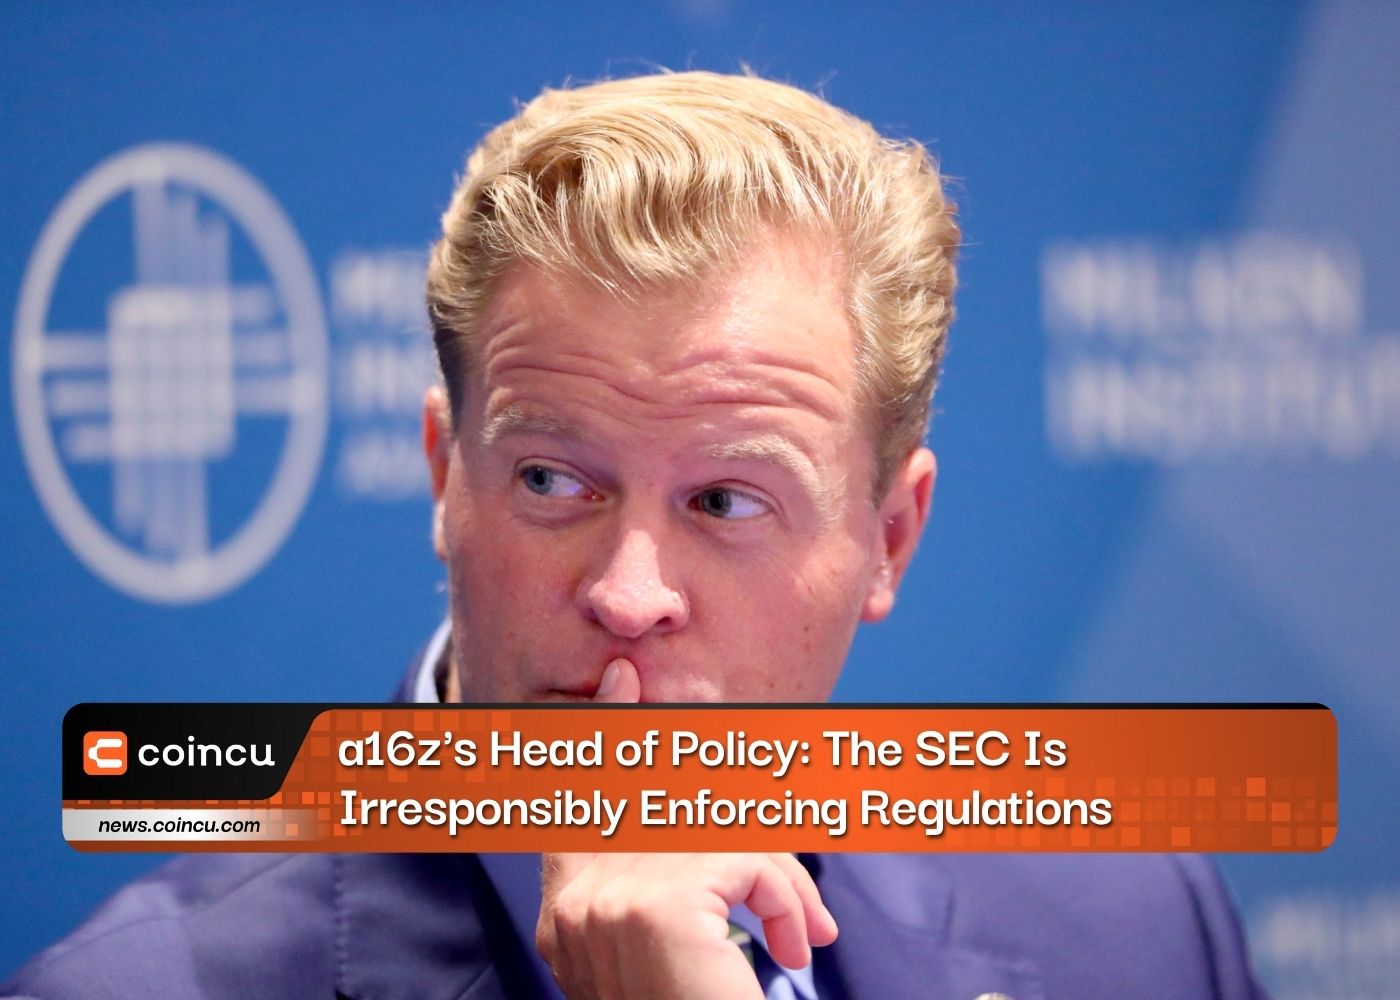 a16z's Head of Policy: The SEC Is Irresponsibly Enforcing Regulations